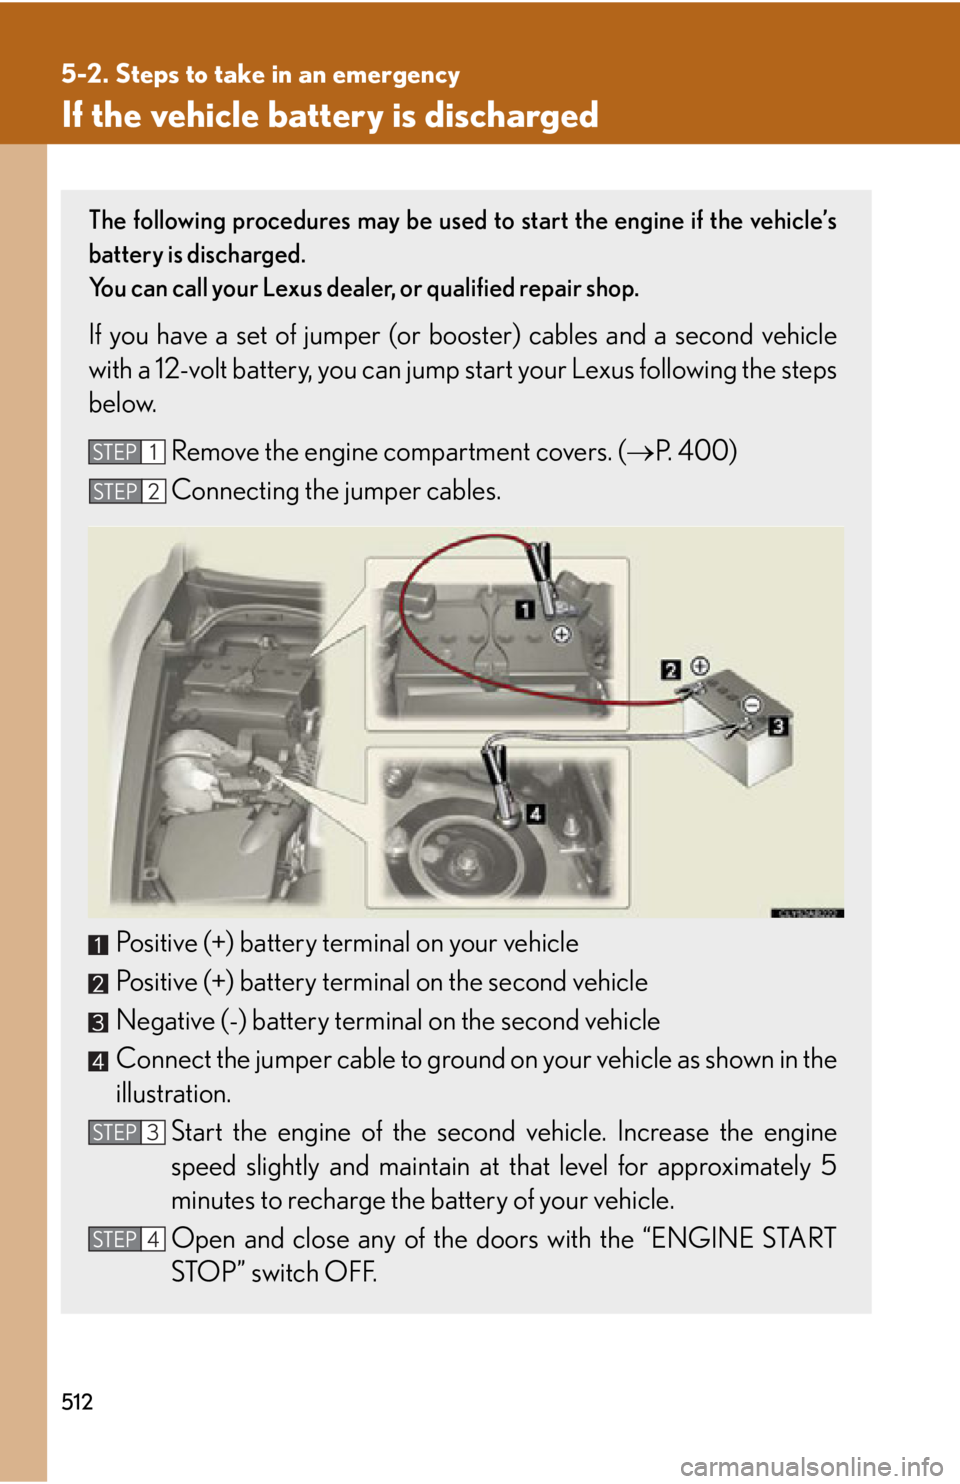 Lexus IS250C 2010  Do-It-Yourself Maintenance / LEXUS 2010 IS350C/250C OWNERS MANUAL (OM53A20U) 512
5-2. Steps to take in an emergency
If the vehicle battery is discharged
The following procedures may be used to start the engine if the vehicle’s
battery is discharged.
You can call your Lexus d